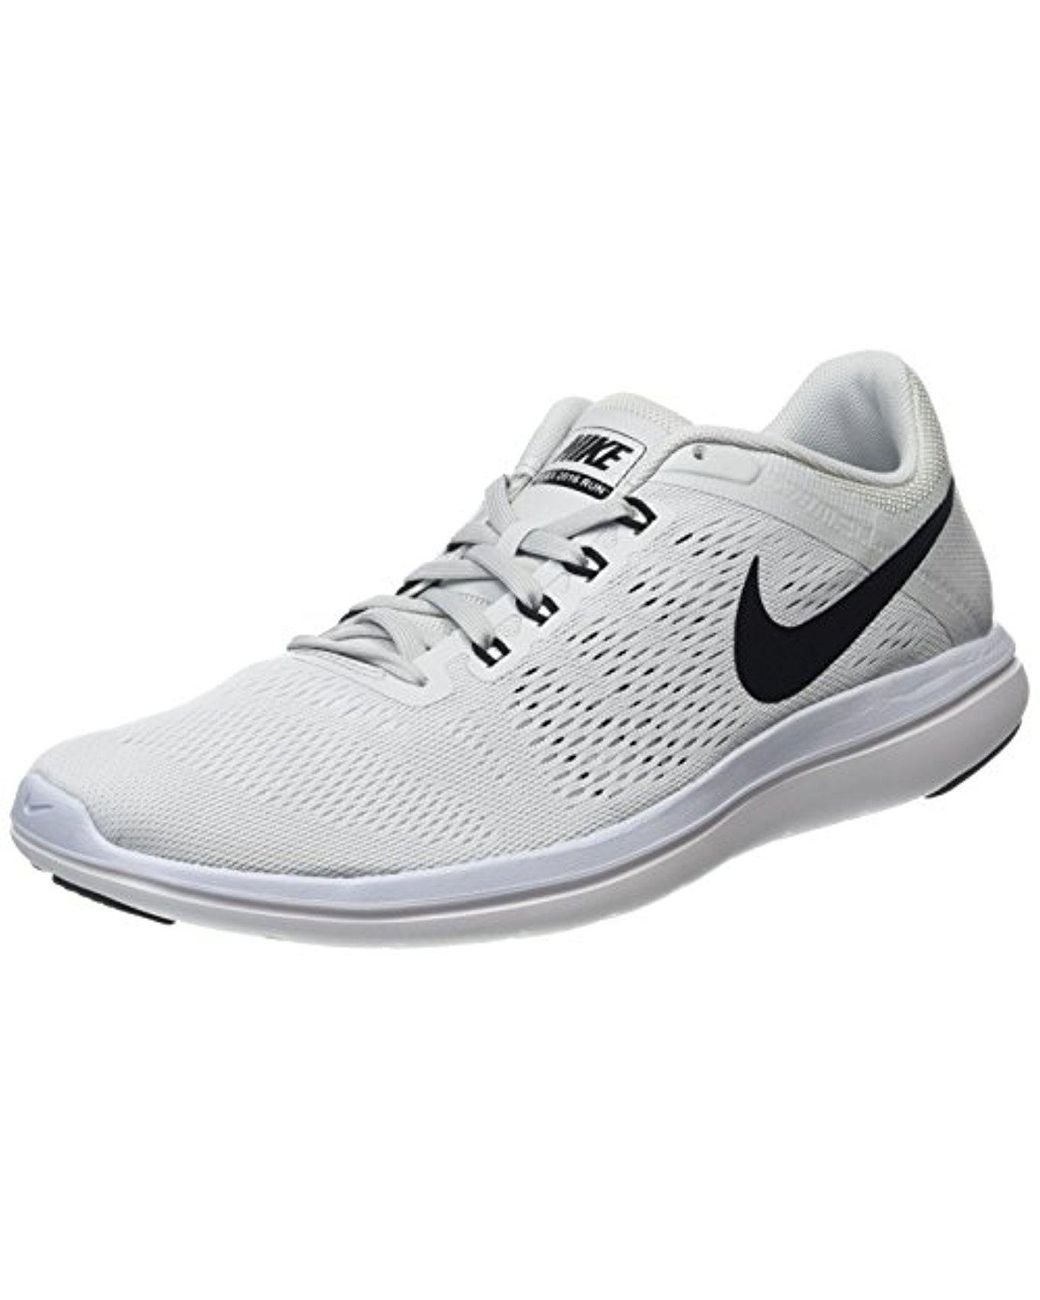 Vientre taiko Acostumbrarse a salud Nike Flex 2016 Rn Running Shoes in White | Lyst